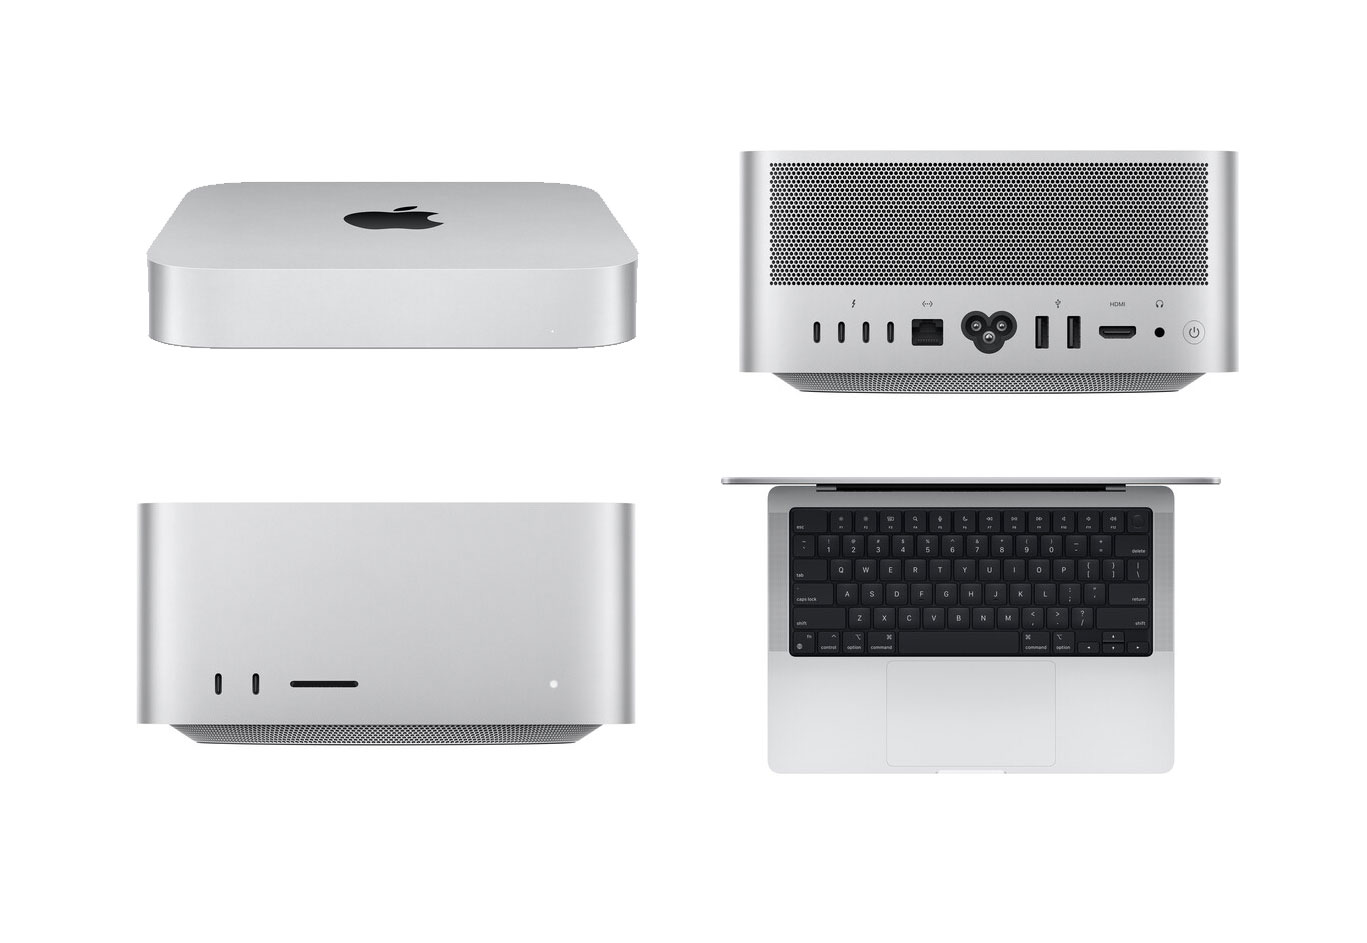 Apple Mac mini M1 2020 review (finally the one I've been waiting for)